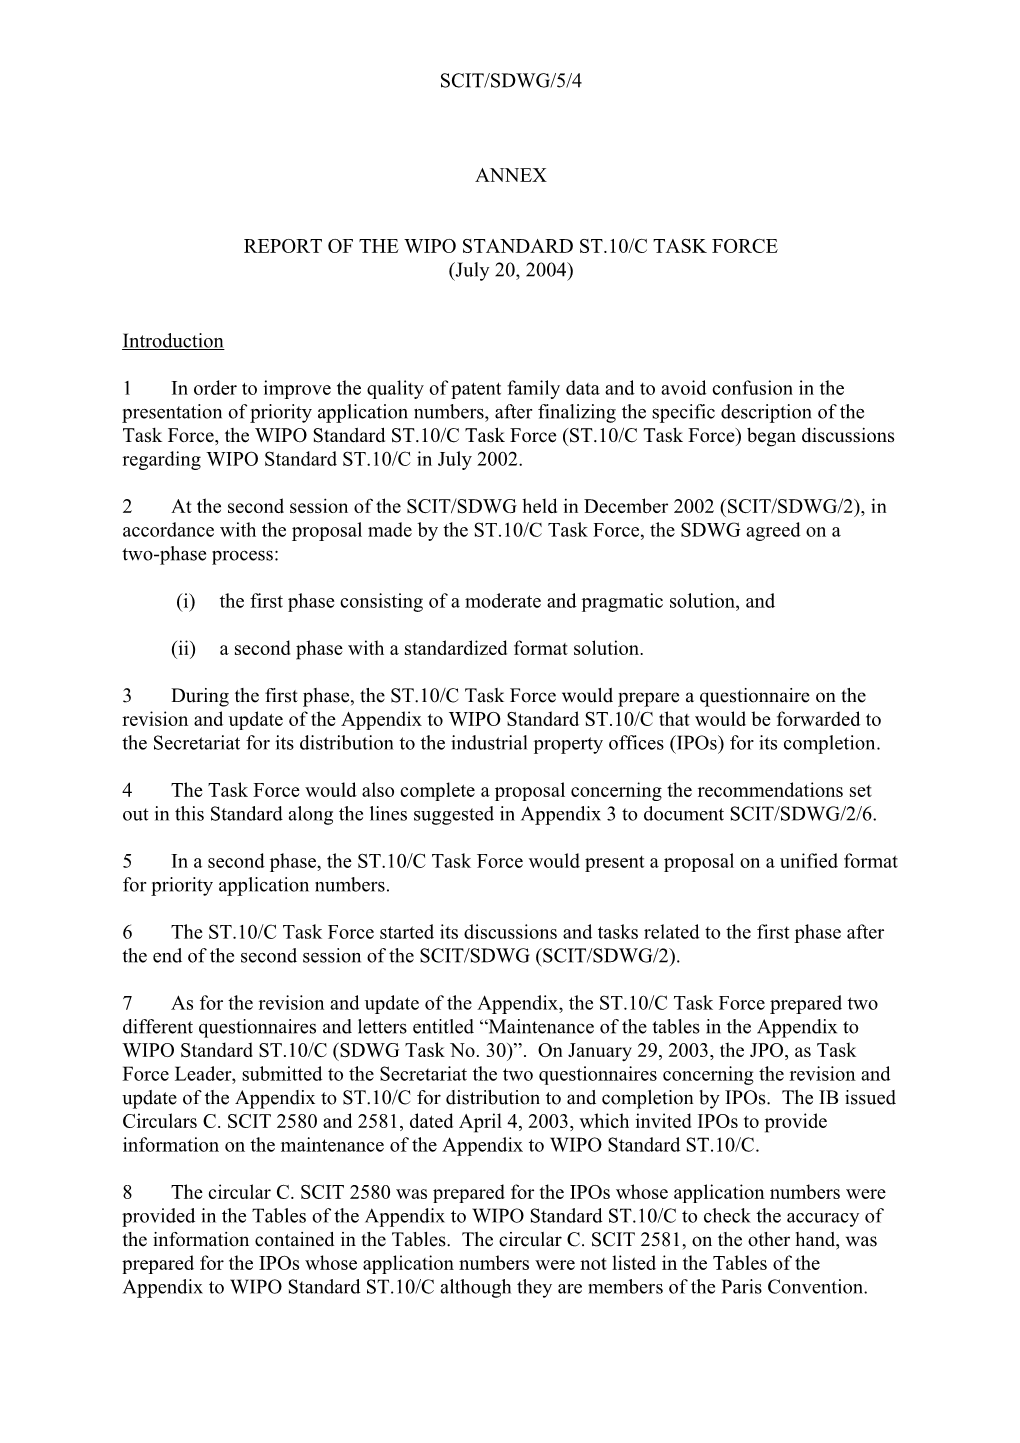 SCIT/SDWG/5/4: Revision of WIPO Standard ST.10/C (Annex 1)